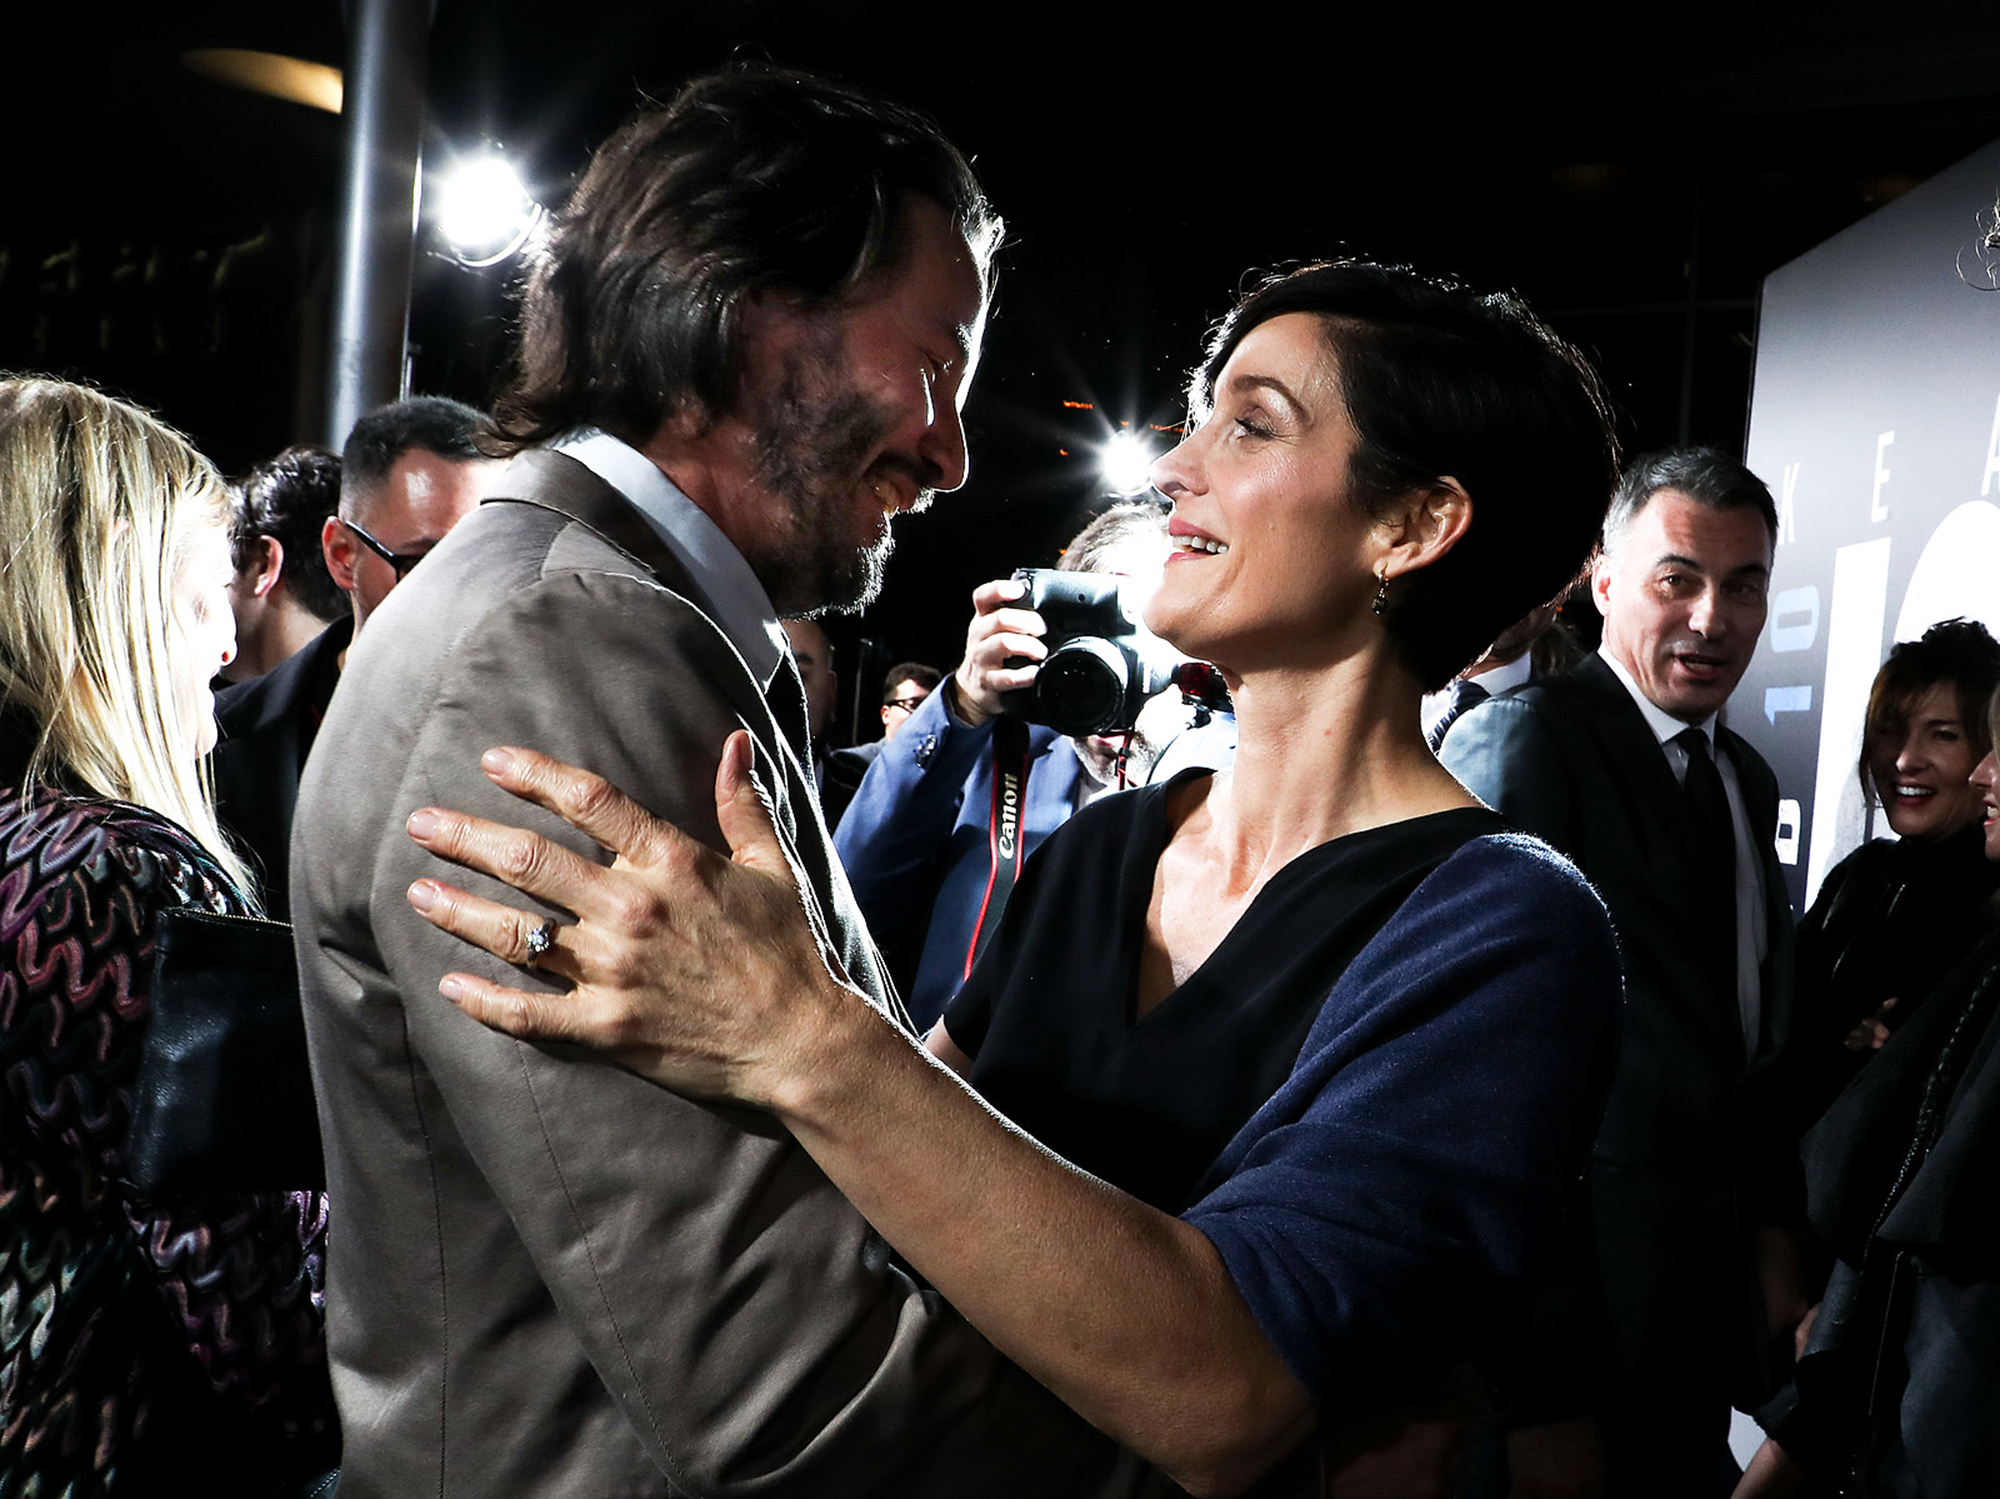 Keanu Reeves and Carrie-Anne Moss at the John Wick: Chapter 2 film premiere in Los Angeles, on Jan. 30. 2017.